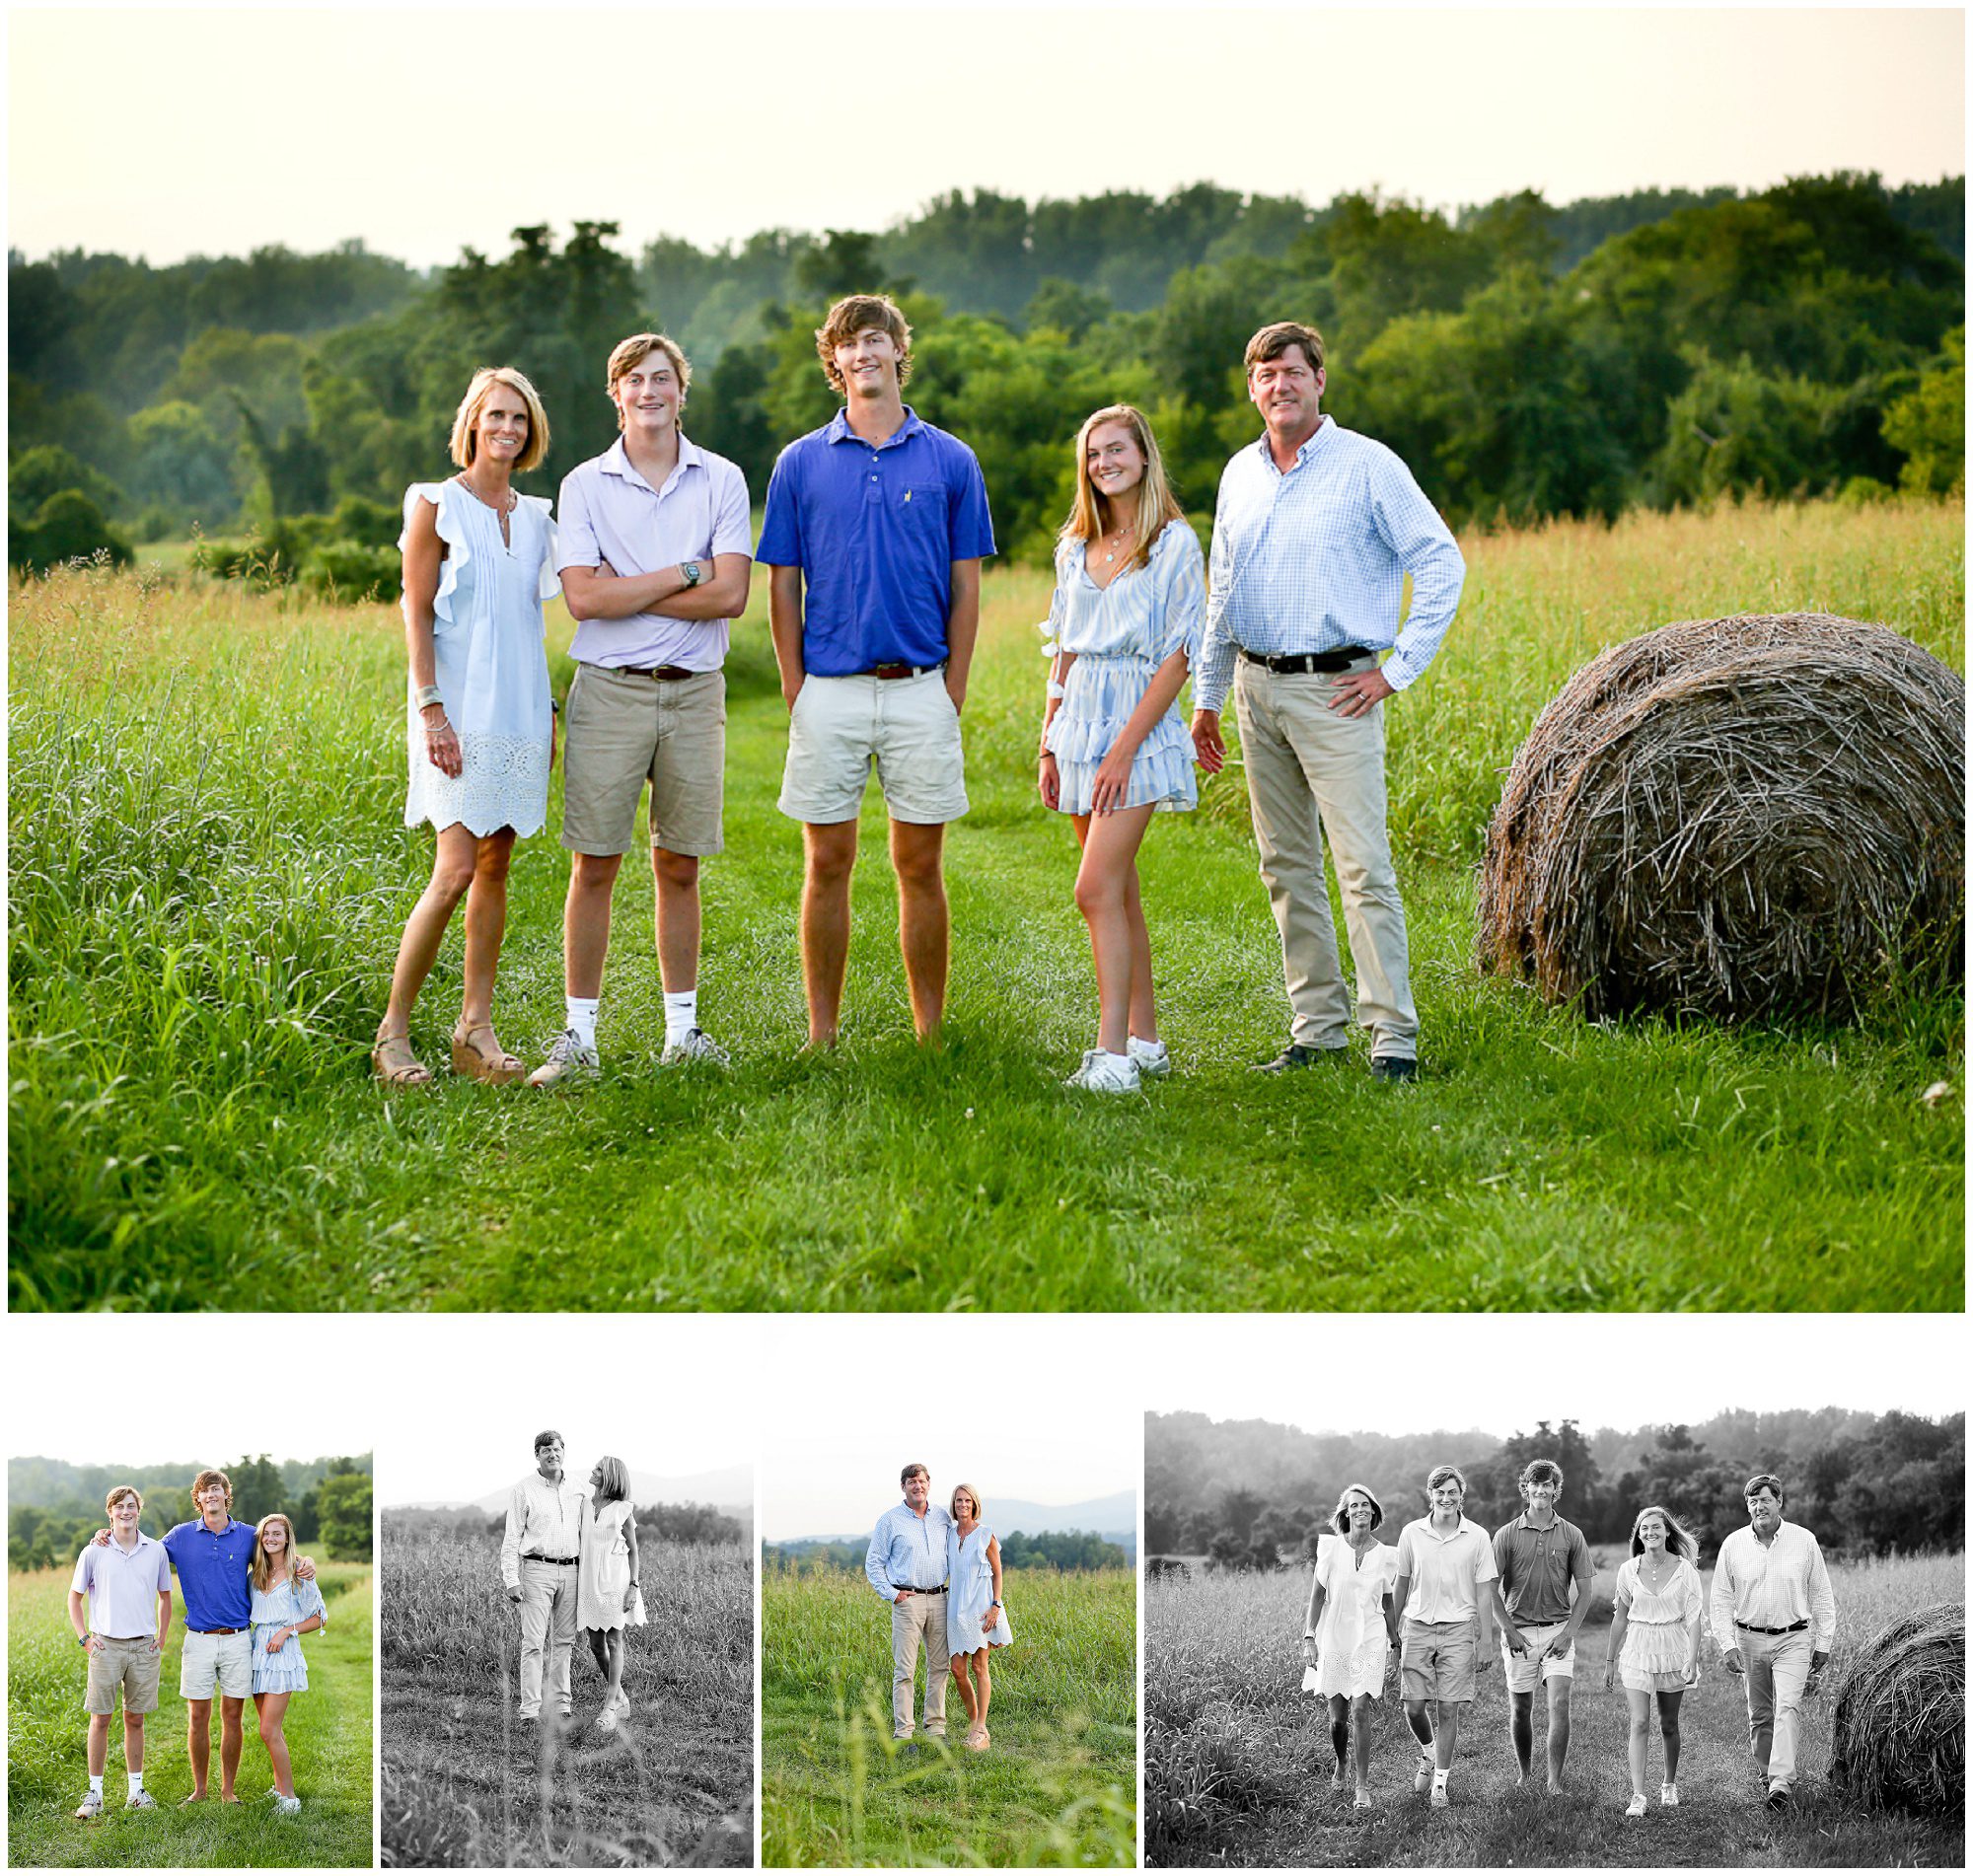 Charlottesville Family Summer Portraits in Albemarle County cville photographer photoshoot teens young adult kids pictures session virginia